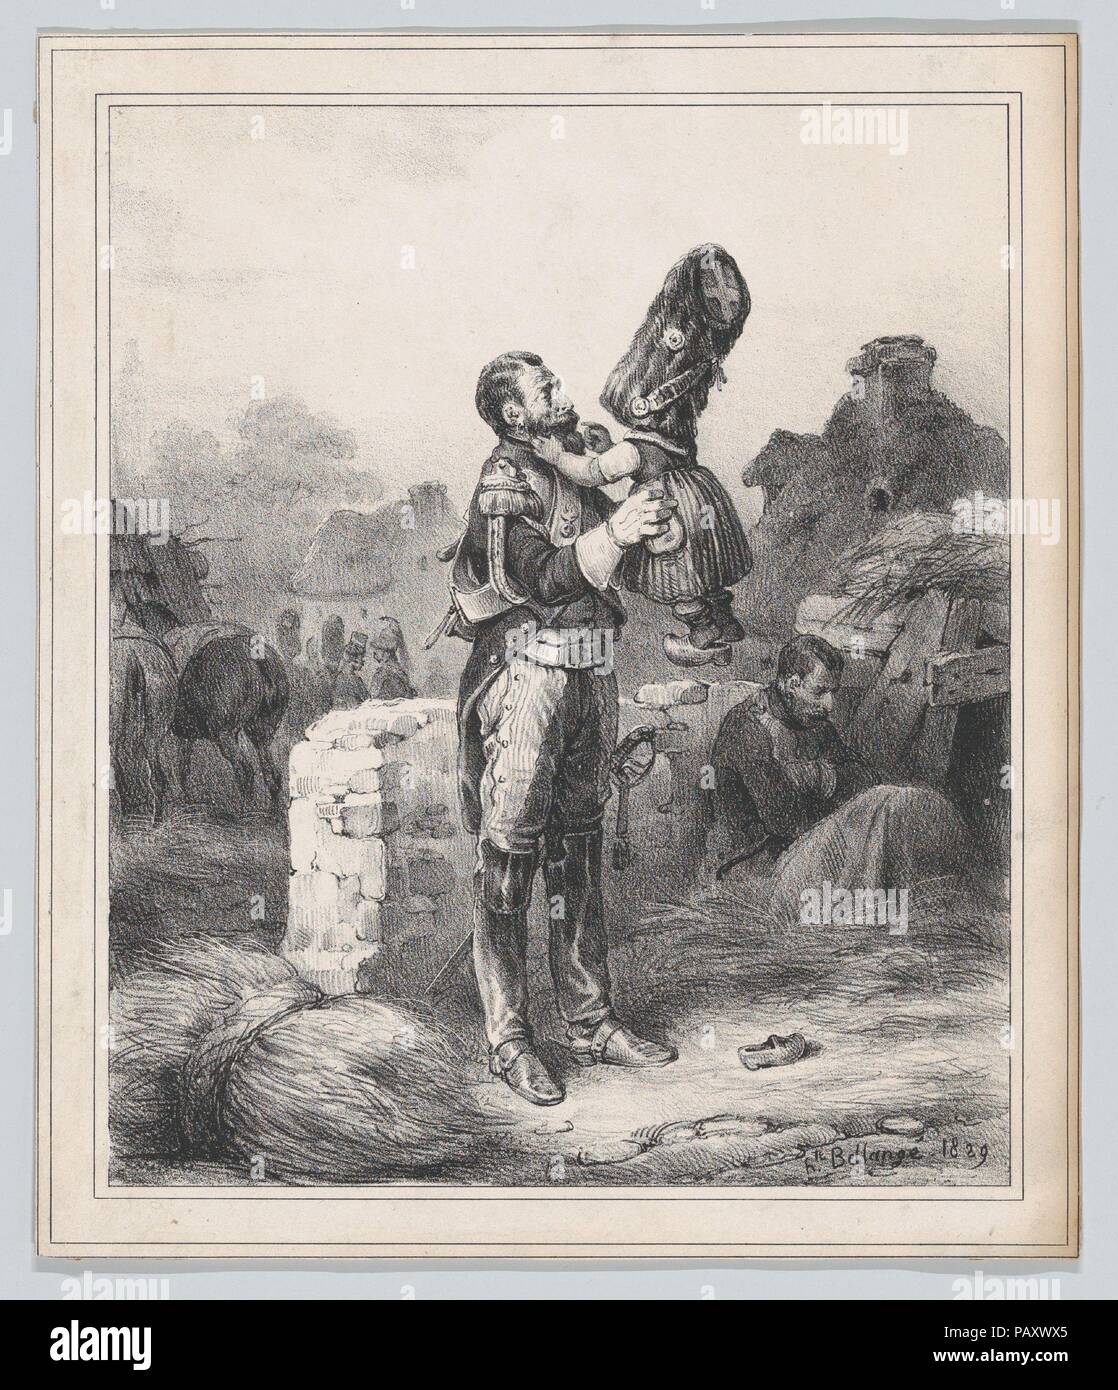 Soldier and small girl. Artist: Hippolyte Bellangé (French, 1800-1866). Dimensions: Sheet: 7 7/8 × 6 11/16 in. (20 × 17 cm)  Image: 6 15/16 × 5 13/16 in. (17.6 × 14.7 cm). Date: 1829. Museum: Metropolitan Museum of Art, New York, USA. Stock Photo